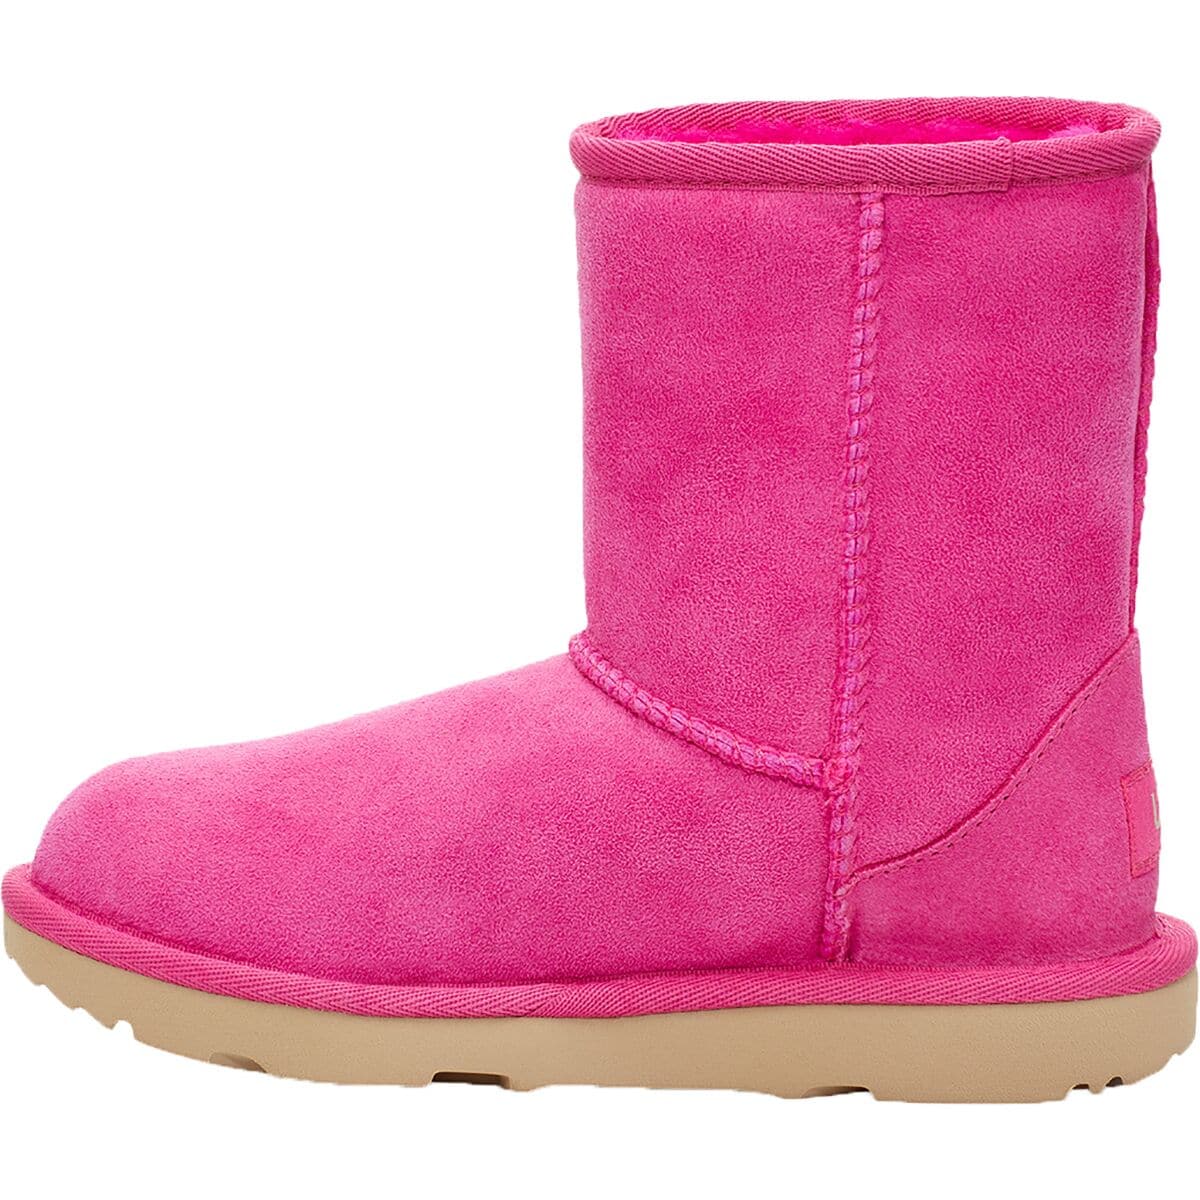 Buy > uggpure boots rn 88276 > in stock